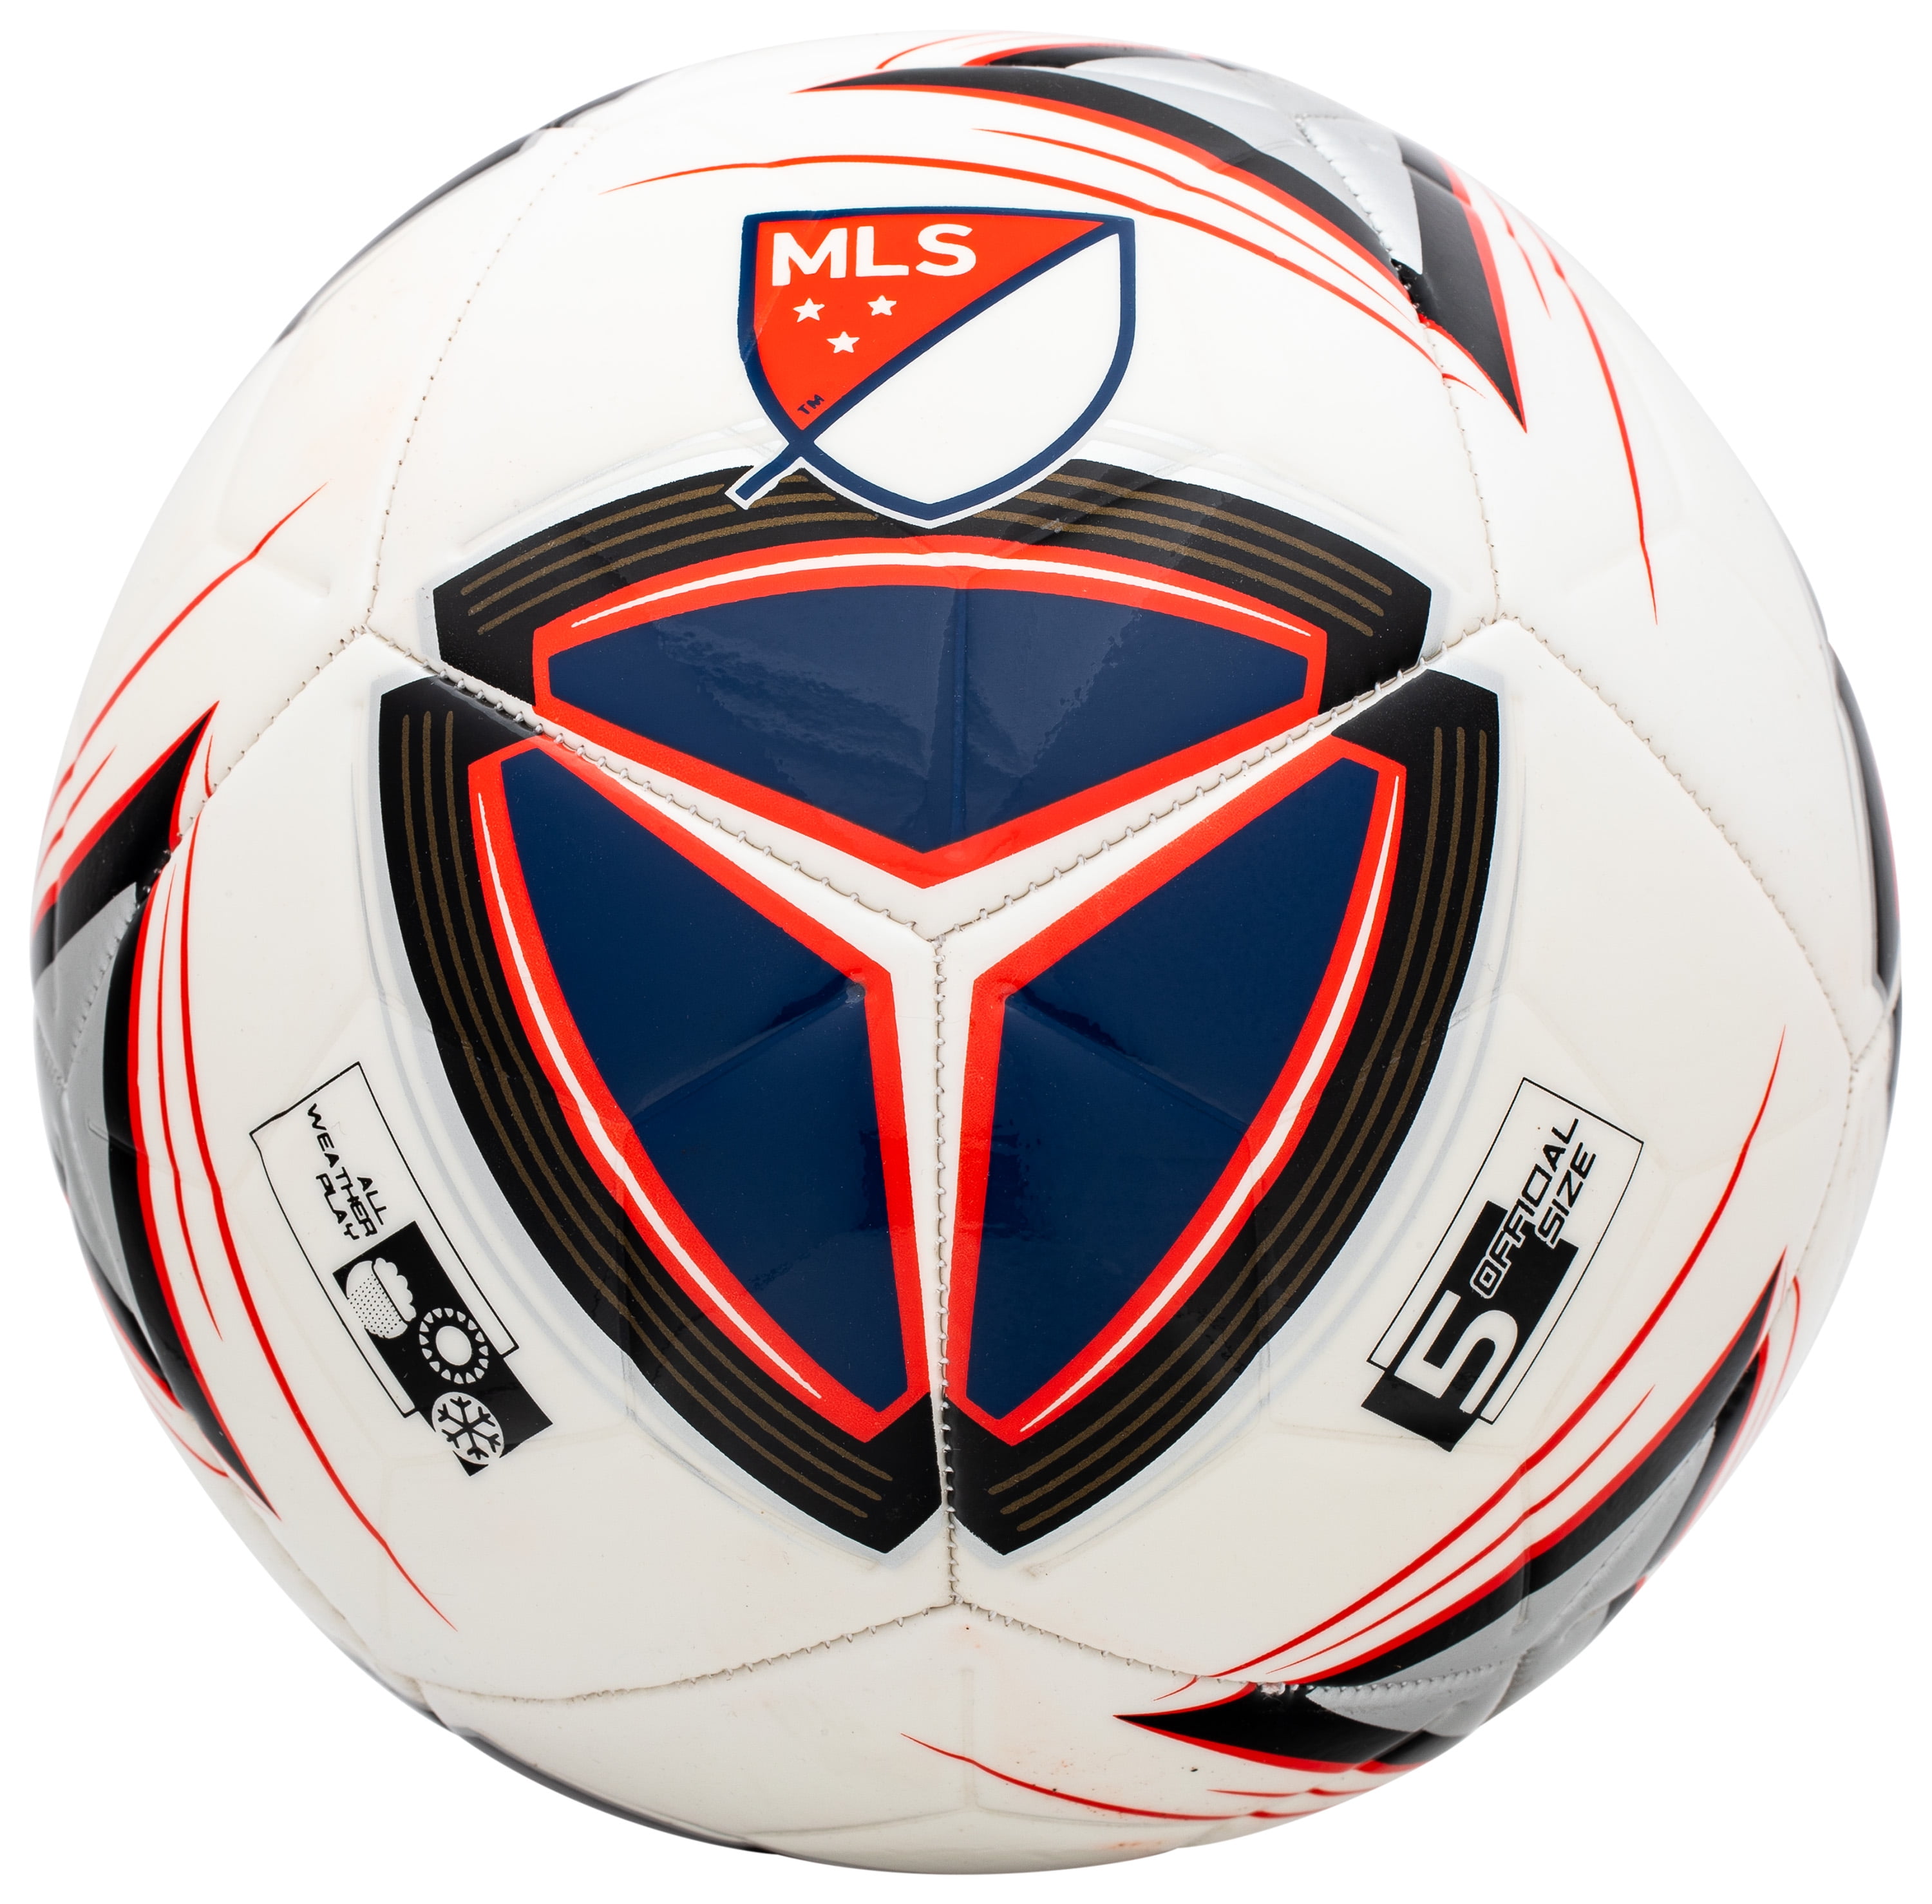 ITALIA Italy Football Soccer Ball All Weather Sporting Goods U.s Official Size 5 for sale online 